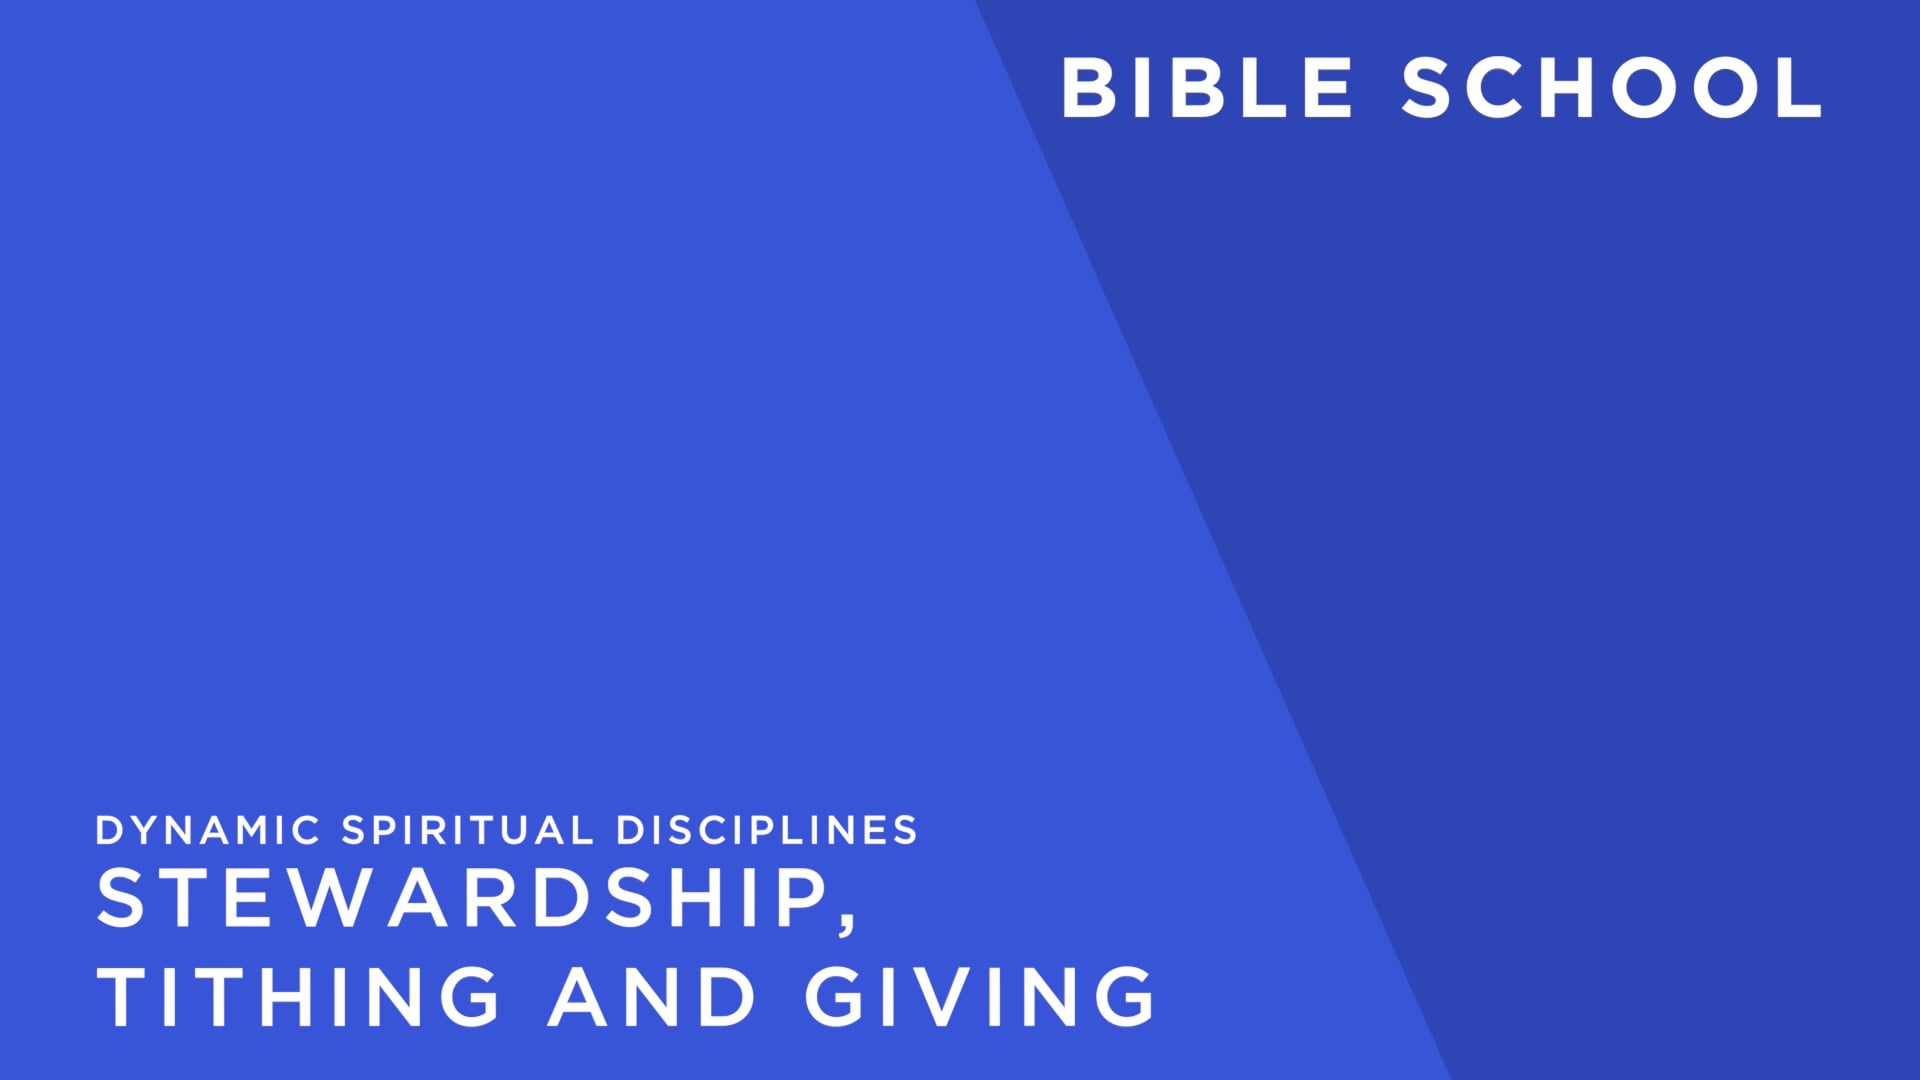 Stewardship, Tithing and Giving